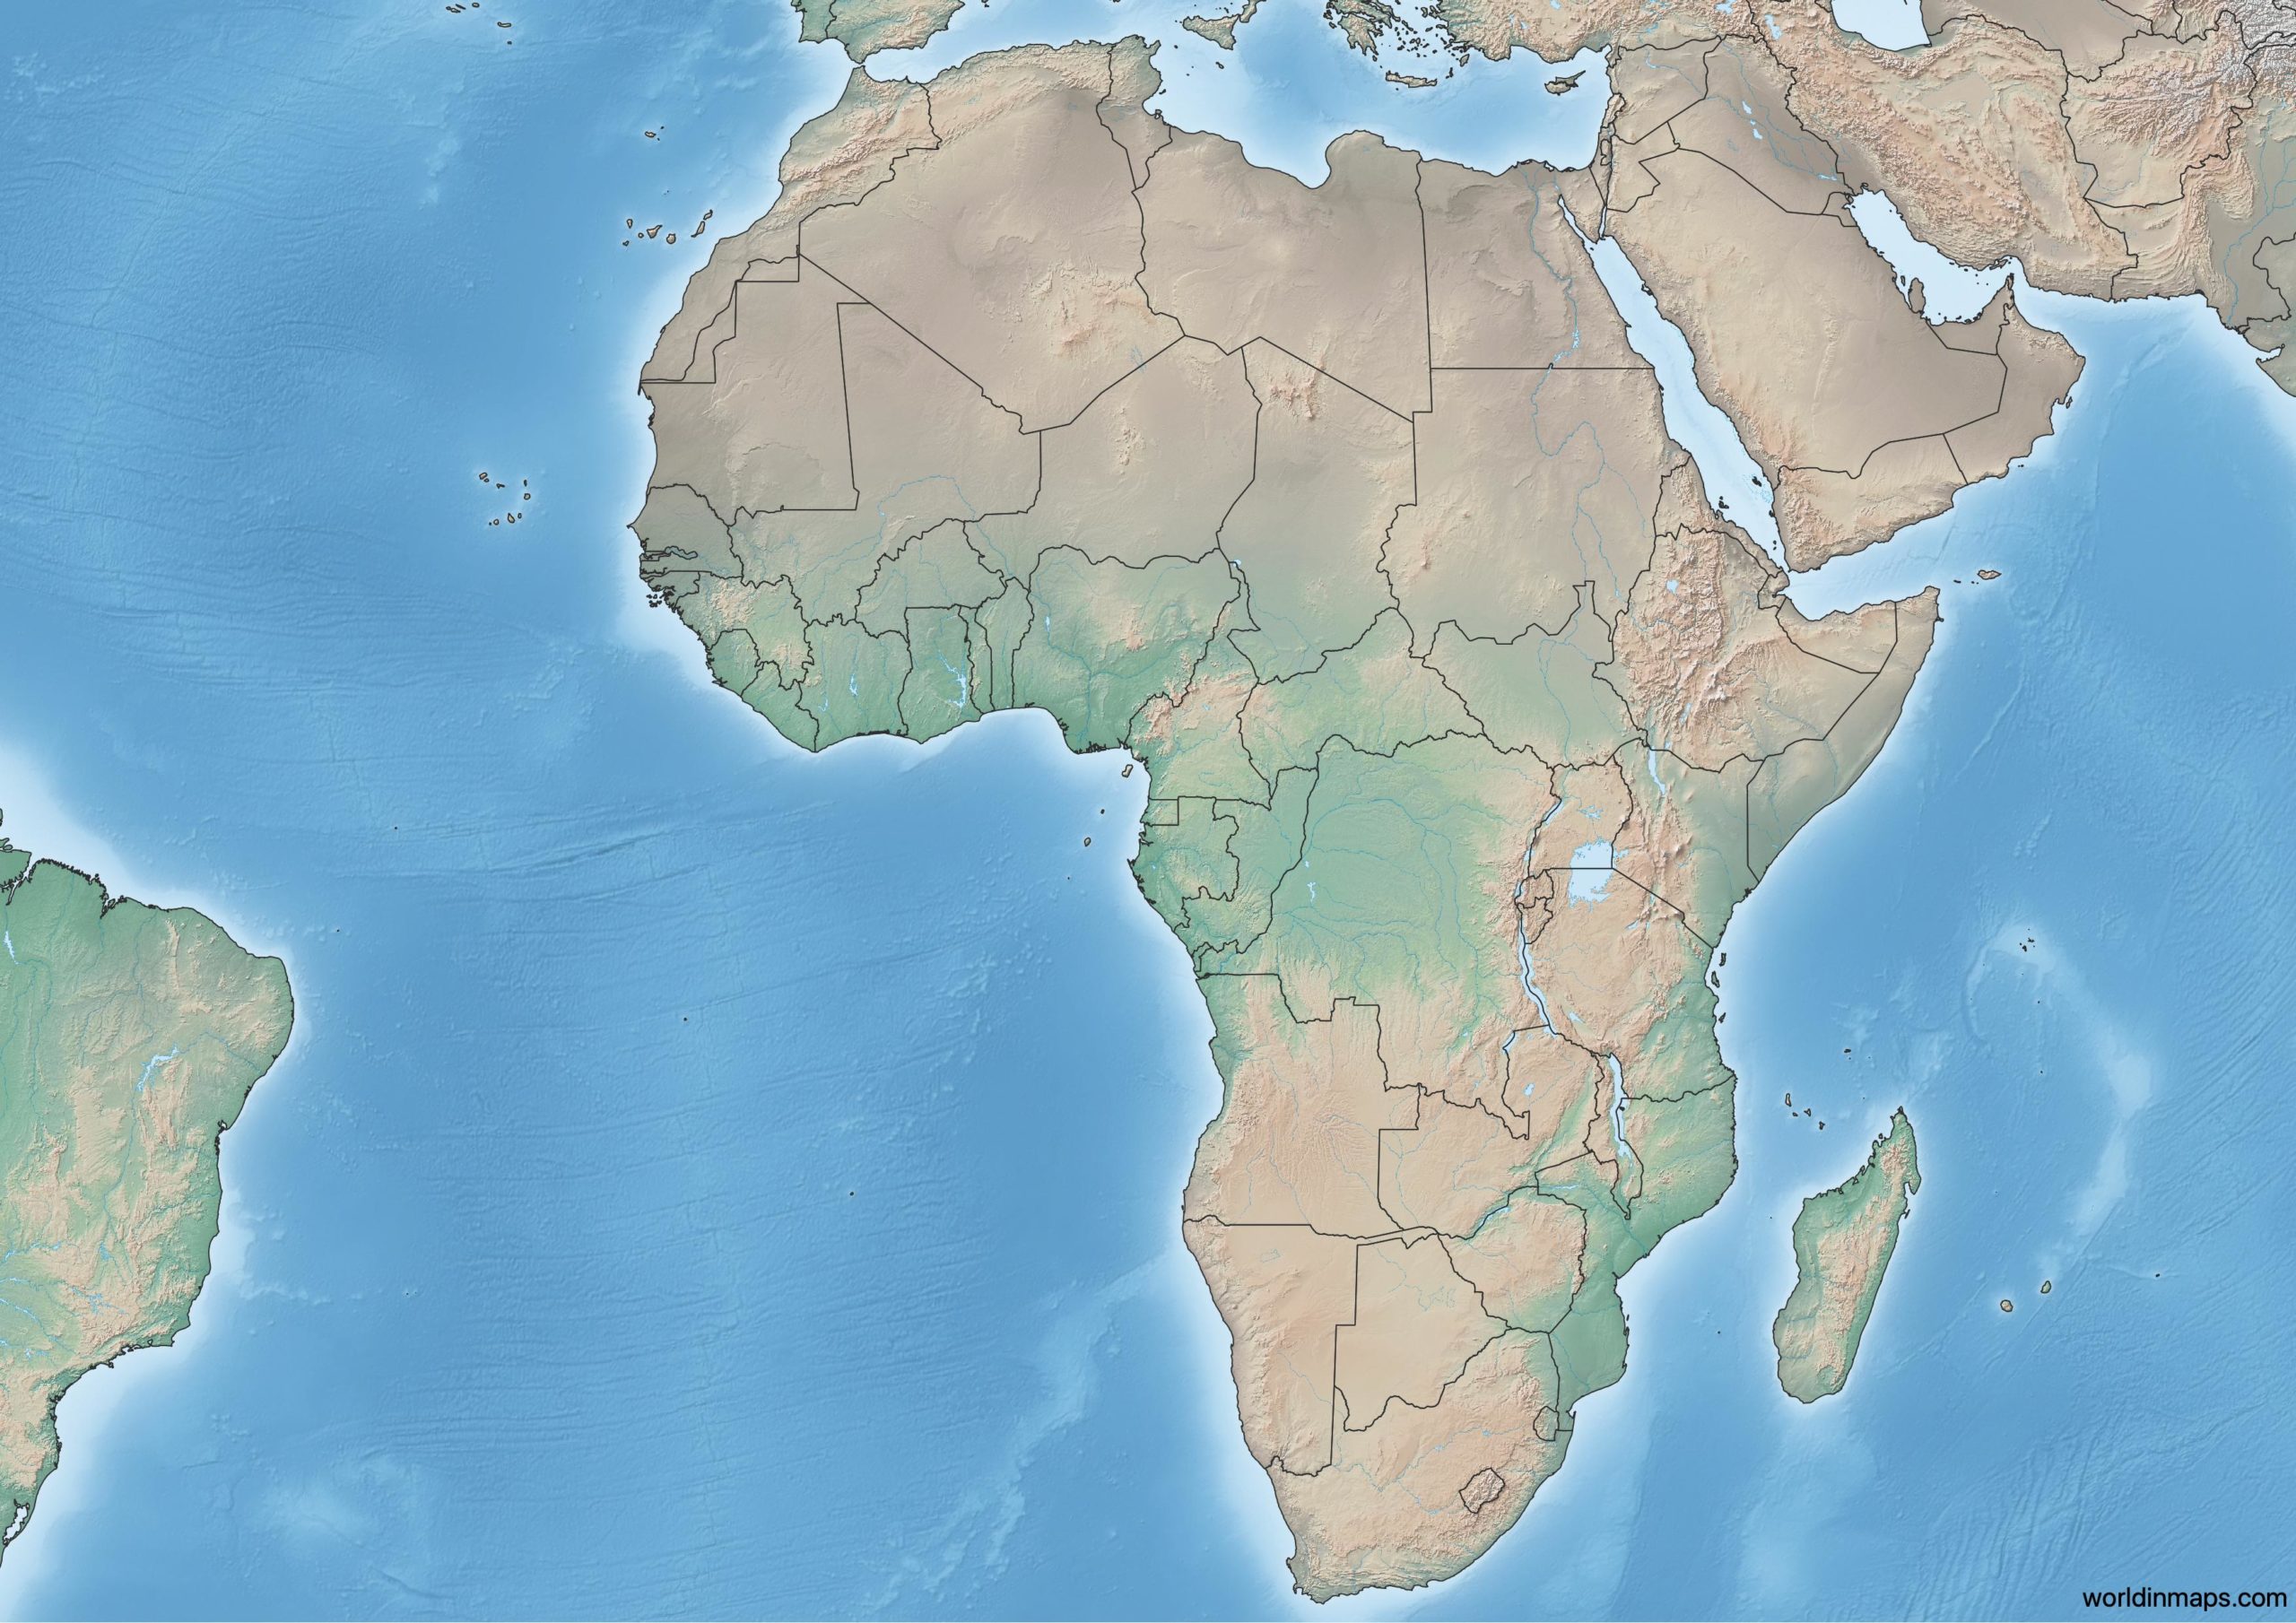 Africa World in maps